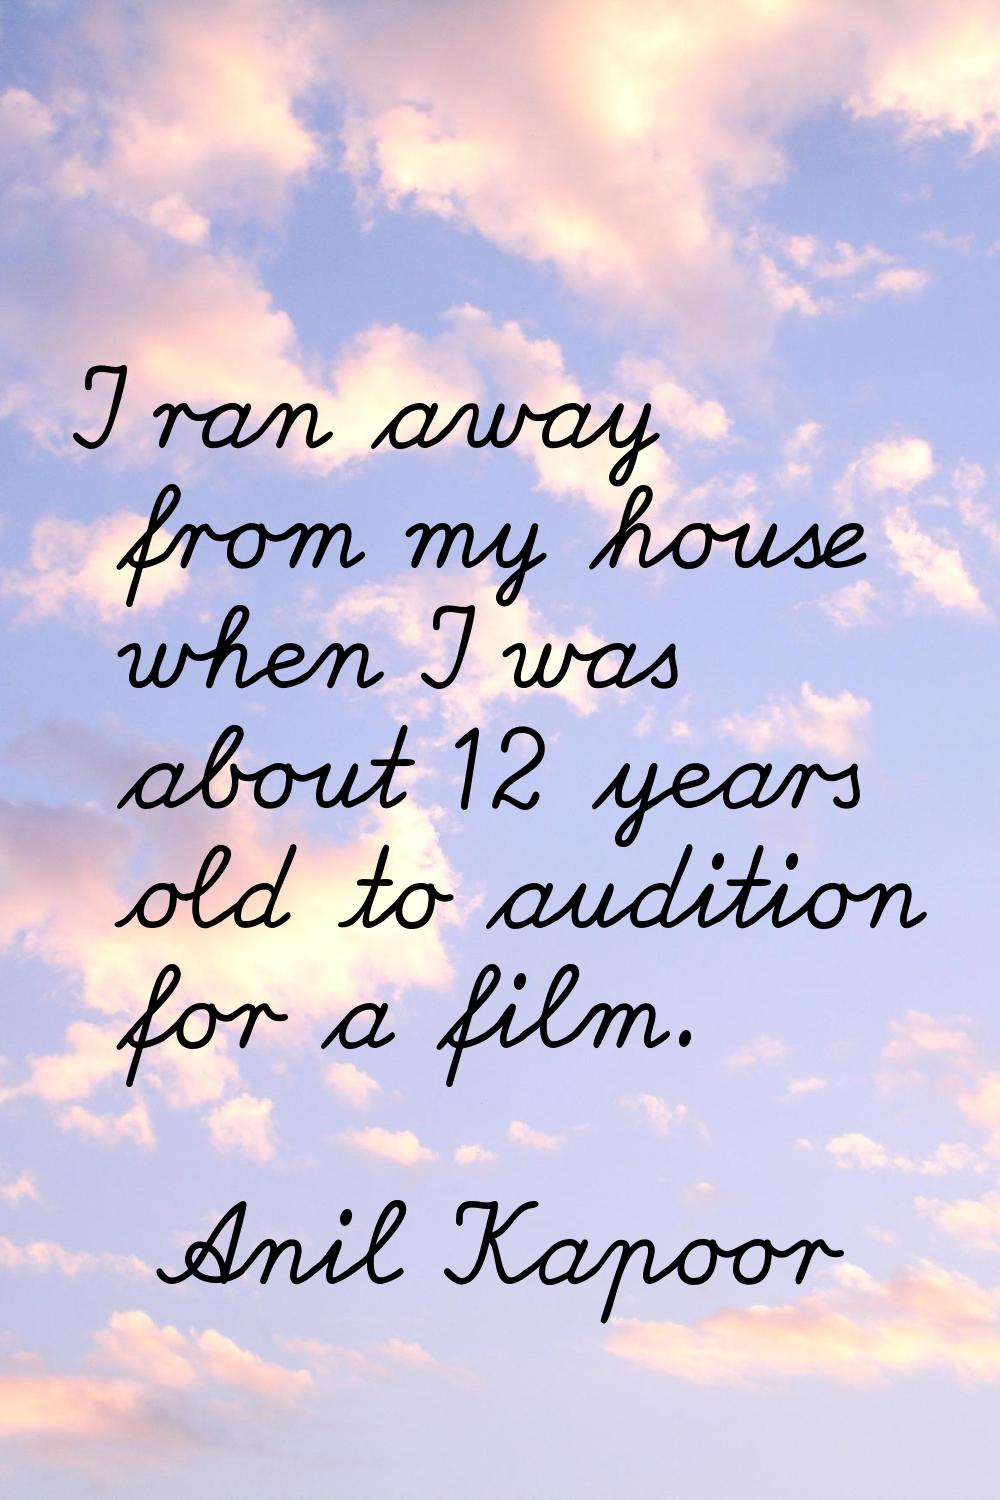 I ran away from my house when I was about 12 years old to audition for a film.